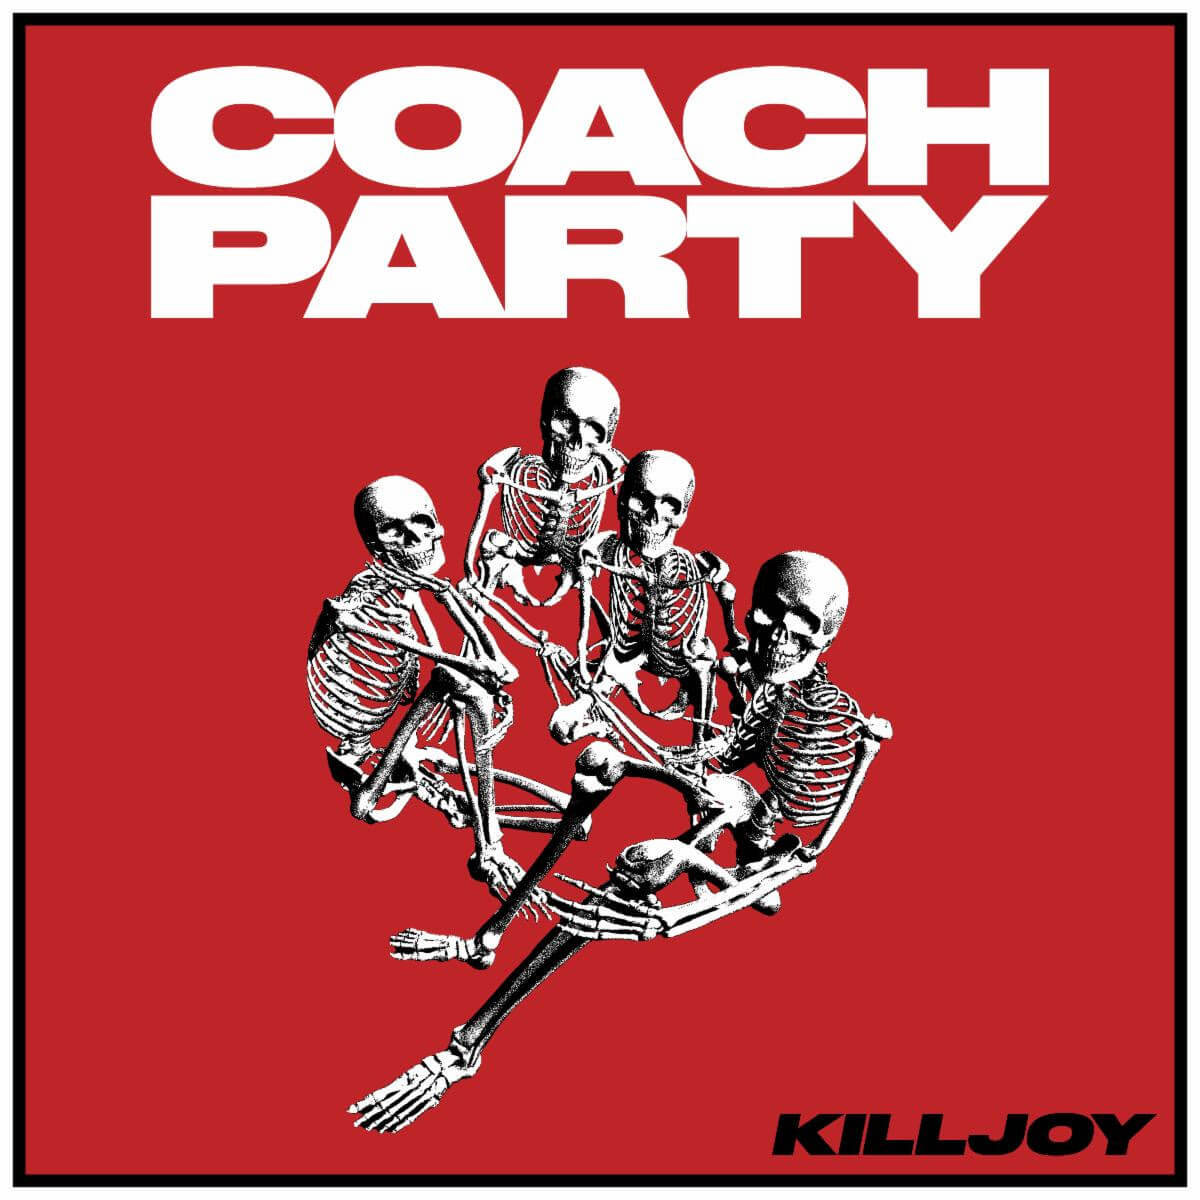 Killjoy by Coach Party album review by Ryan Meyer for Northern Transmissions